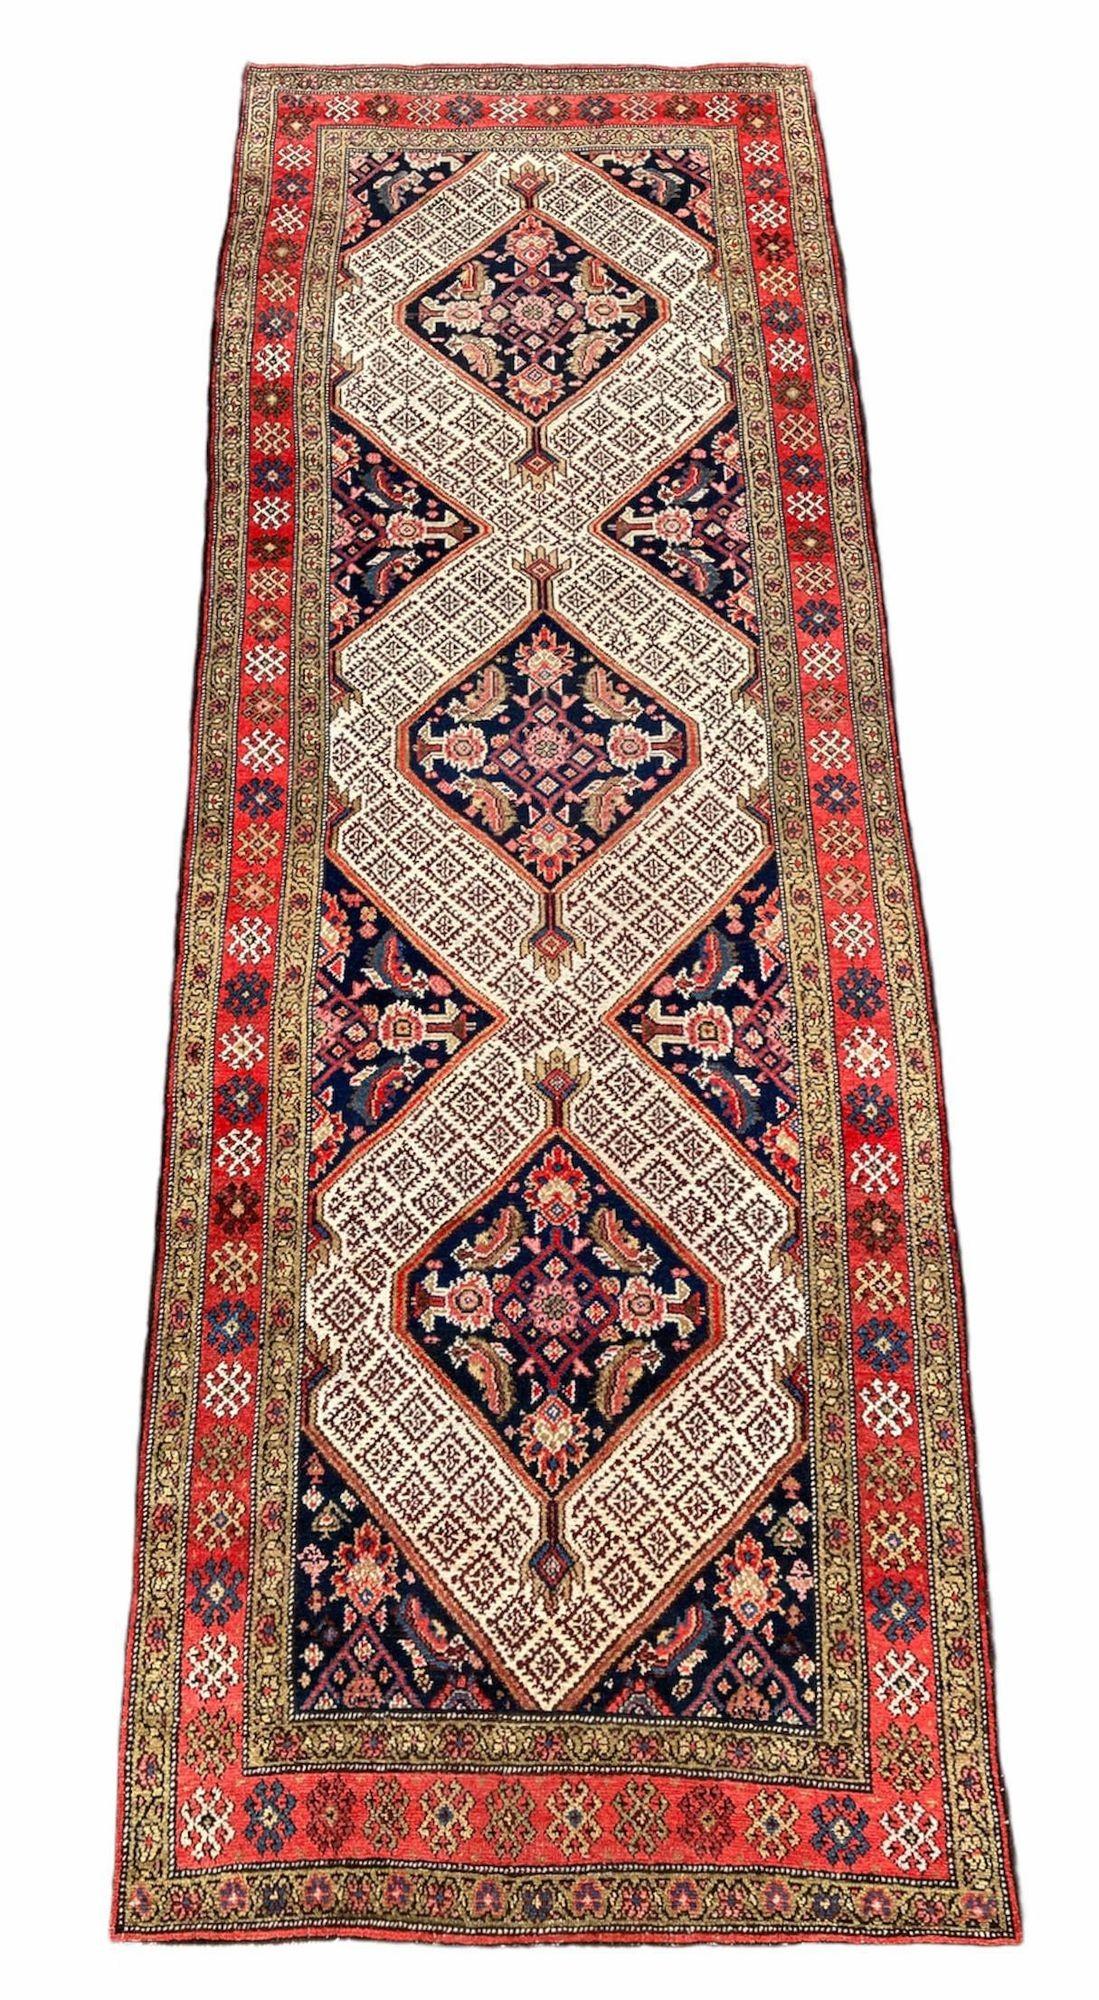 A beautiful antique Sarab runner, handwoven circa 1910 with a 3 medallion geometrical design on a deep indigo field and fabulous secondary colours. A lovely wide runner ideal for an entrance or wide hallway.
Size: 3.18m x 1.10m (10ft 5in x 3ft